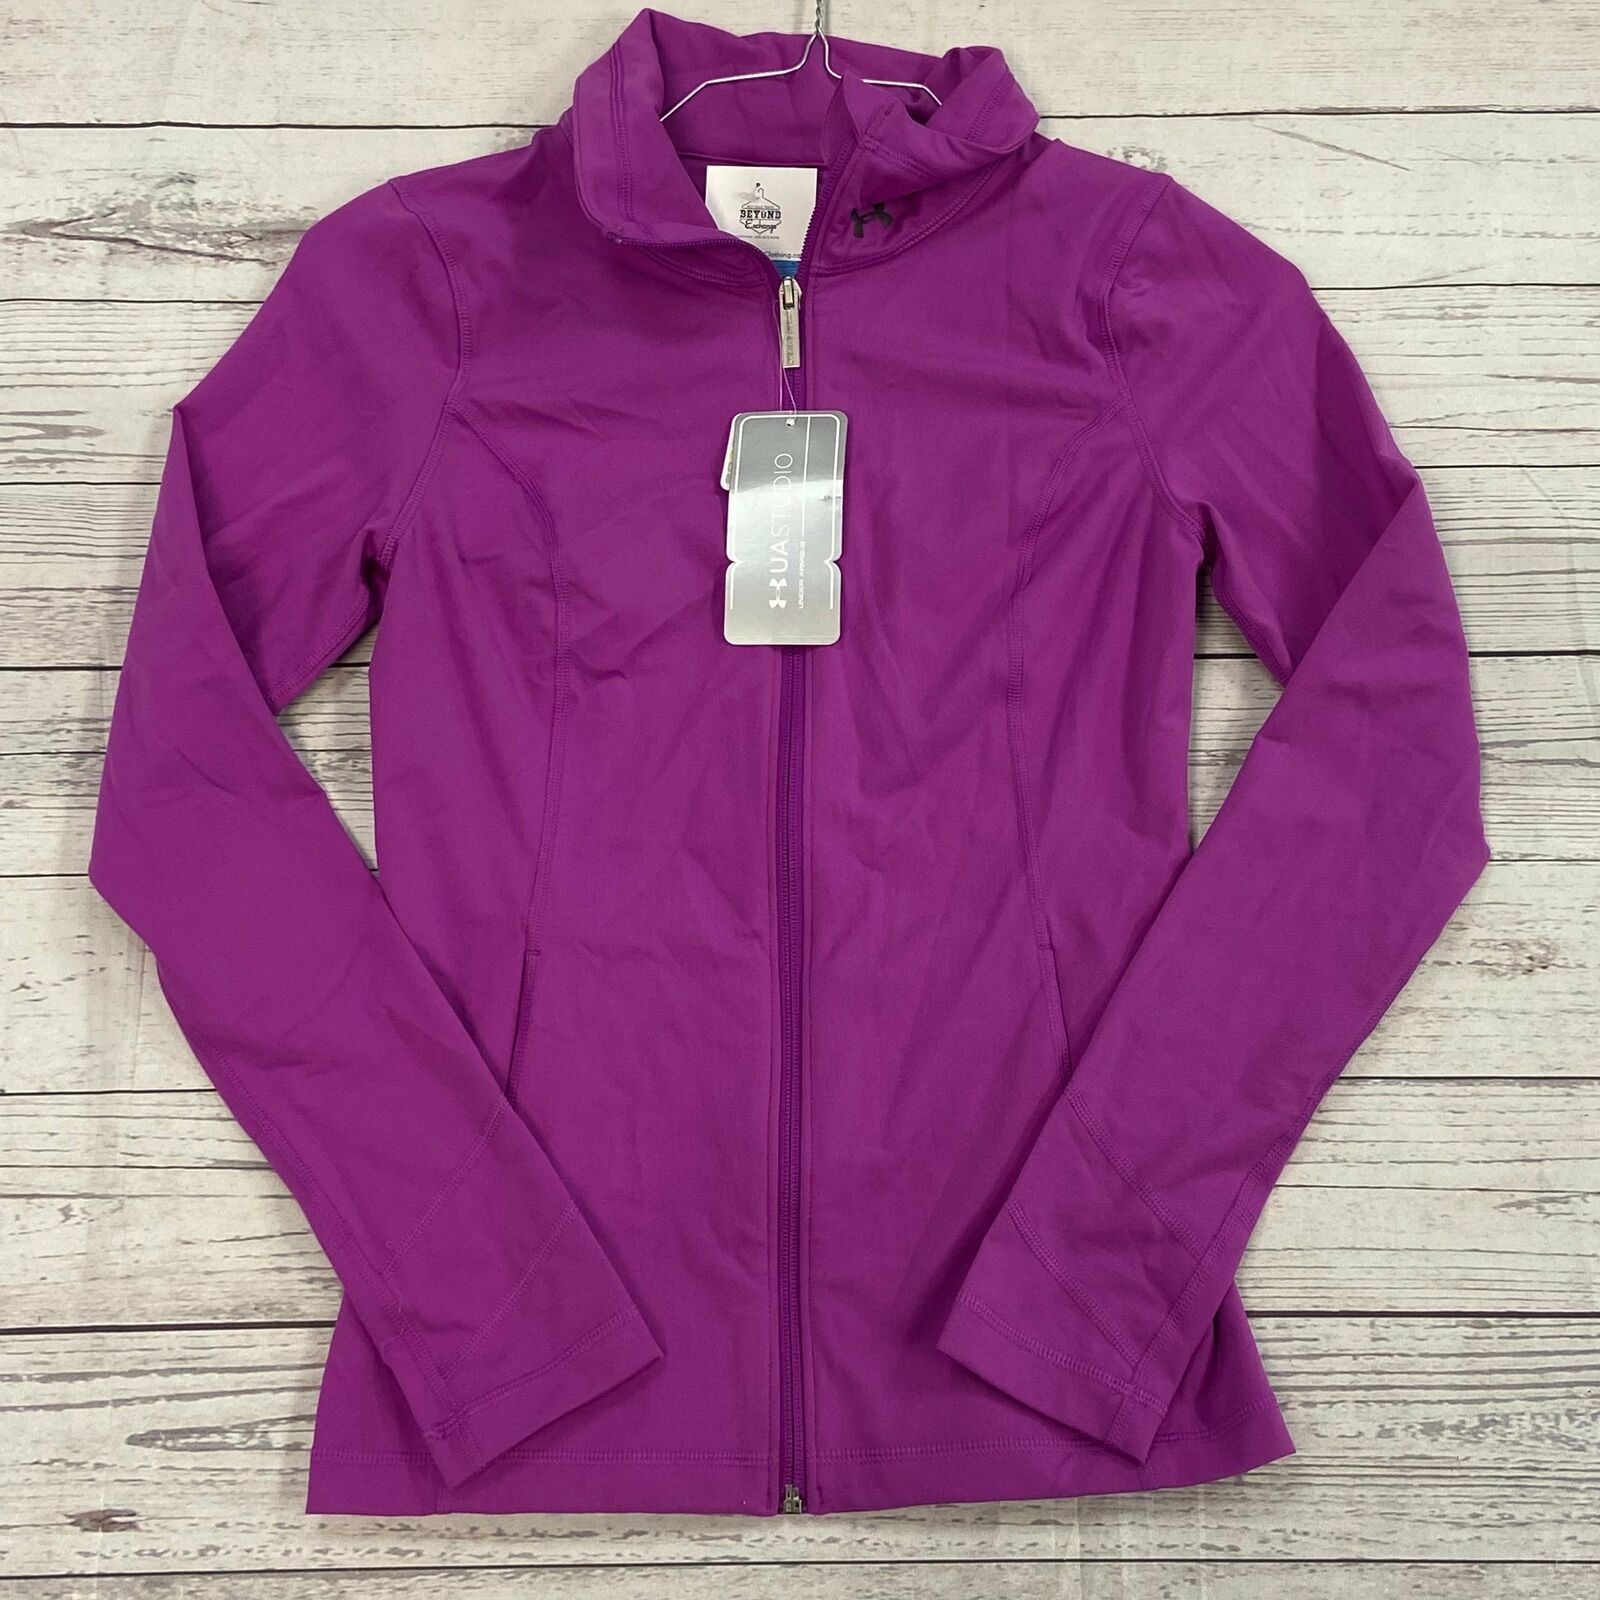 Under Armour Heat Gear Purple Zip Up Active Jacket Woman’s Size Small NEW